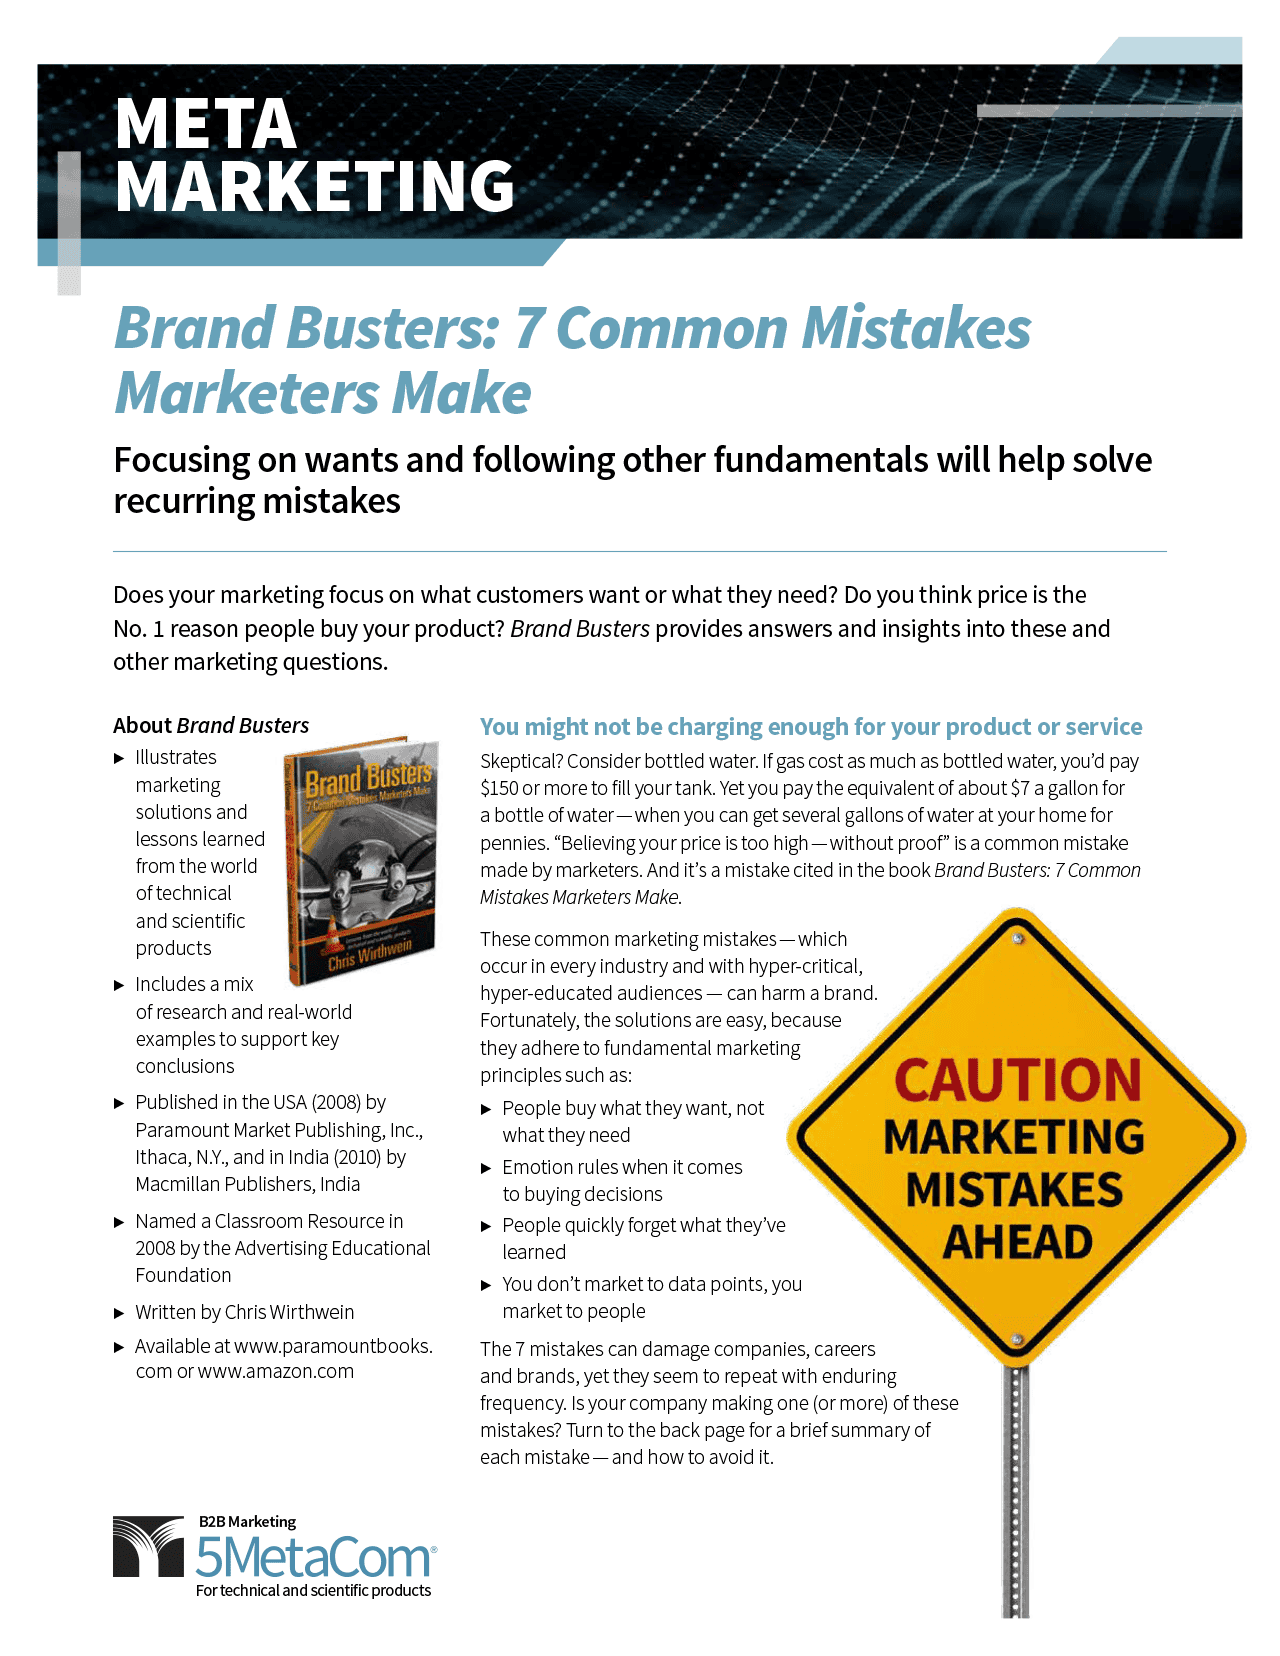 Brand Busters: 7 Common Mistakes Marketers Make